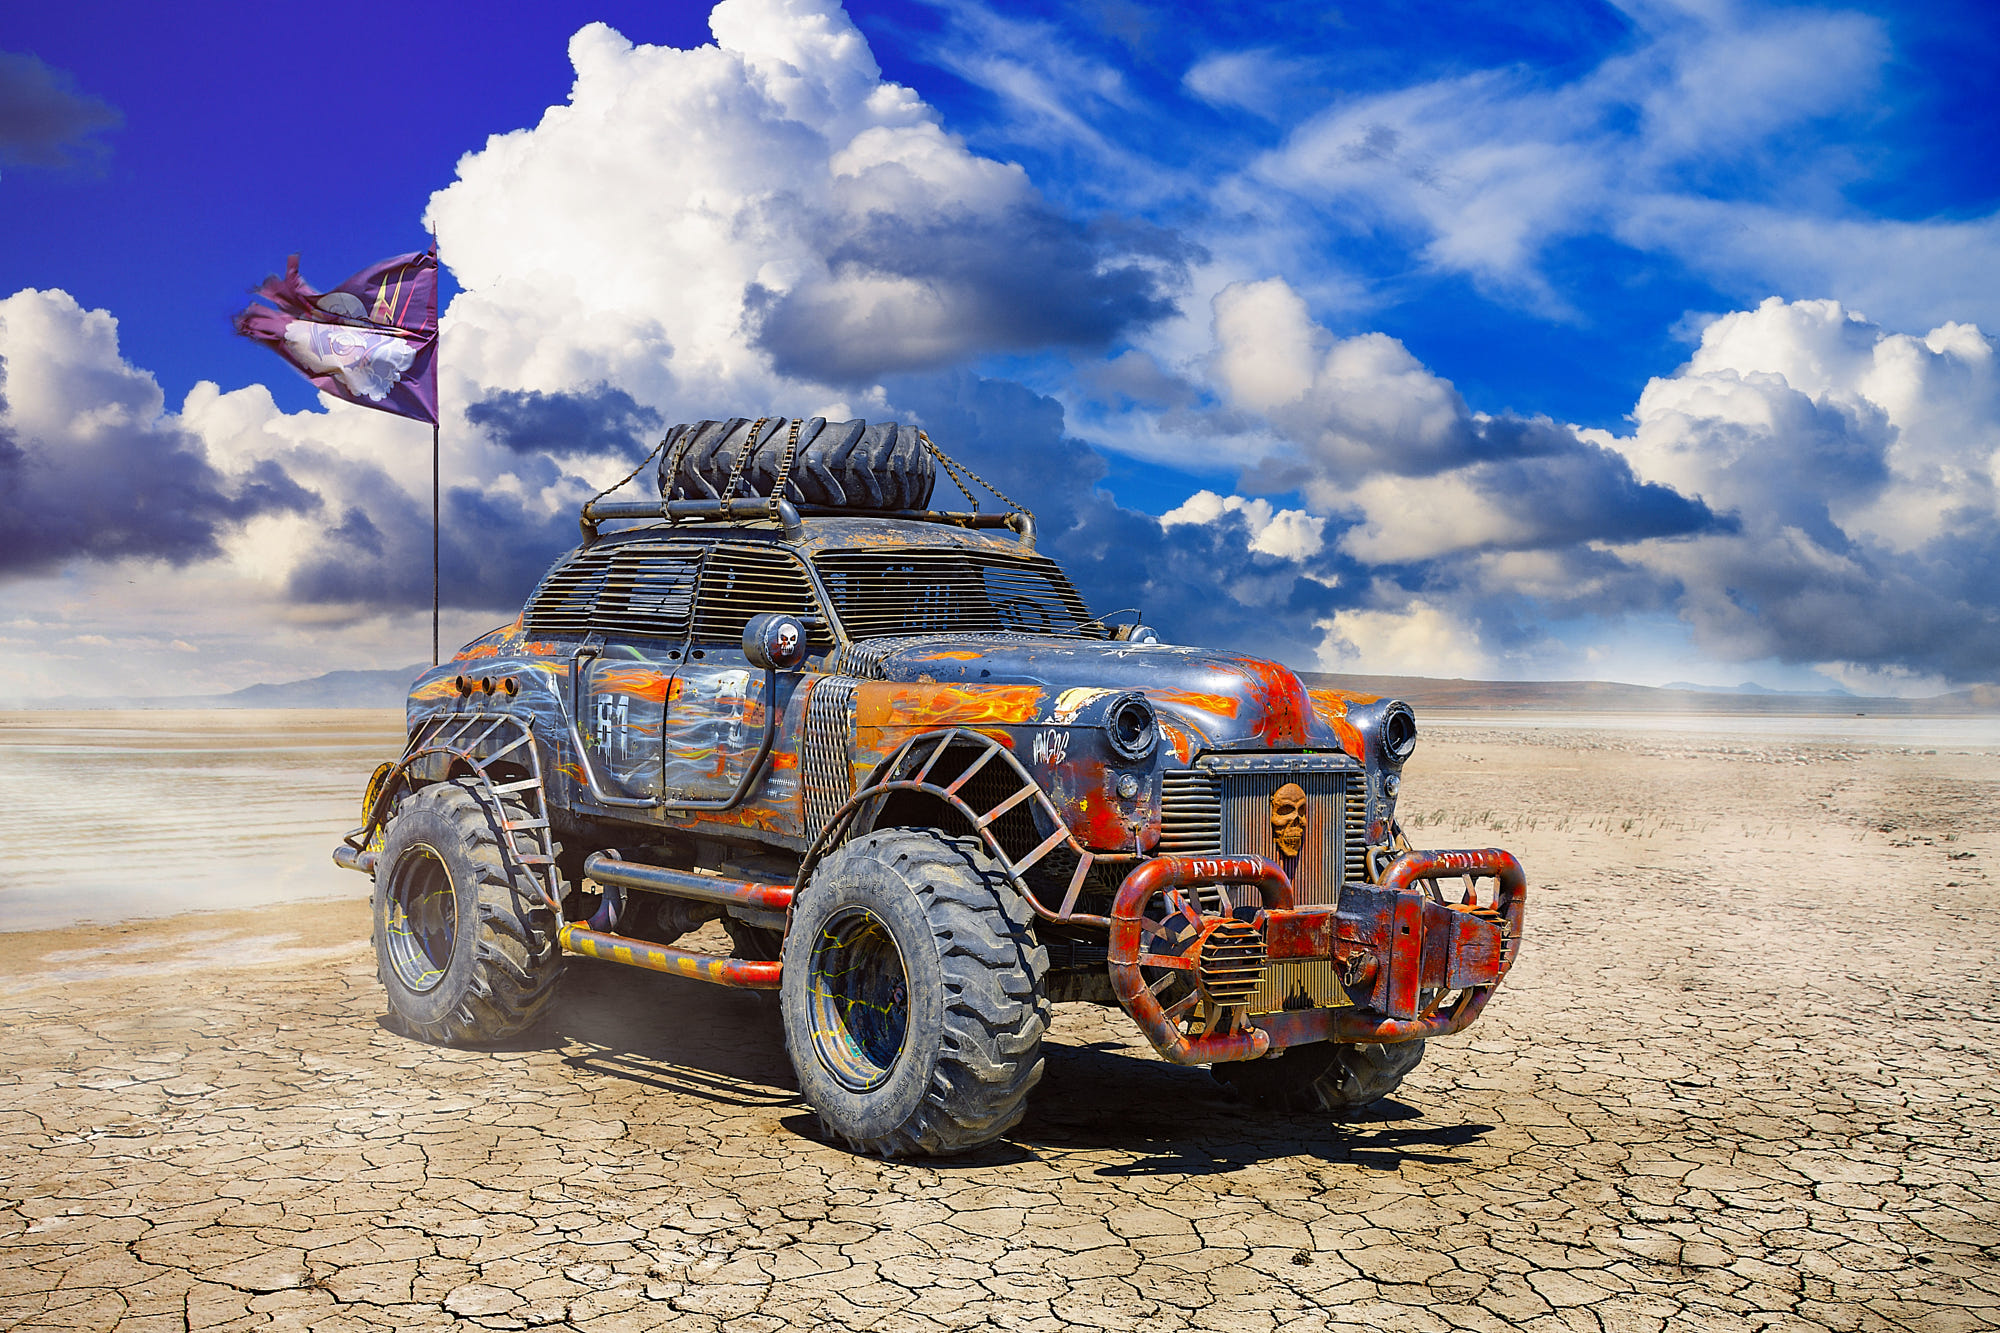 Car Desolate Landscape Apocalyptic Punk Flag Desert Sky Clouds Wheels Chains 4x4 Front Angle View 2000x1333